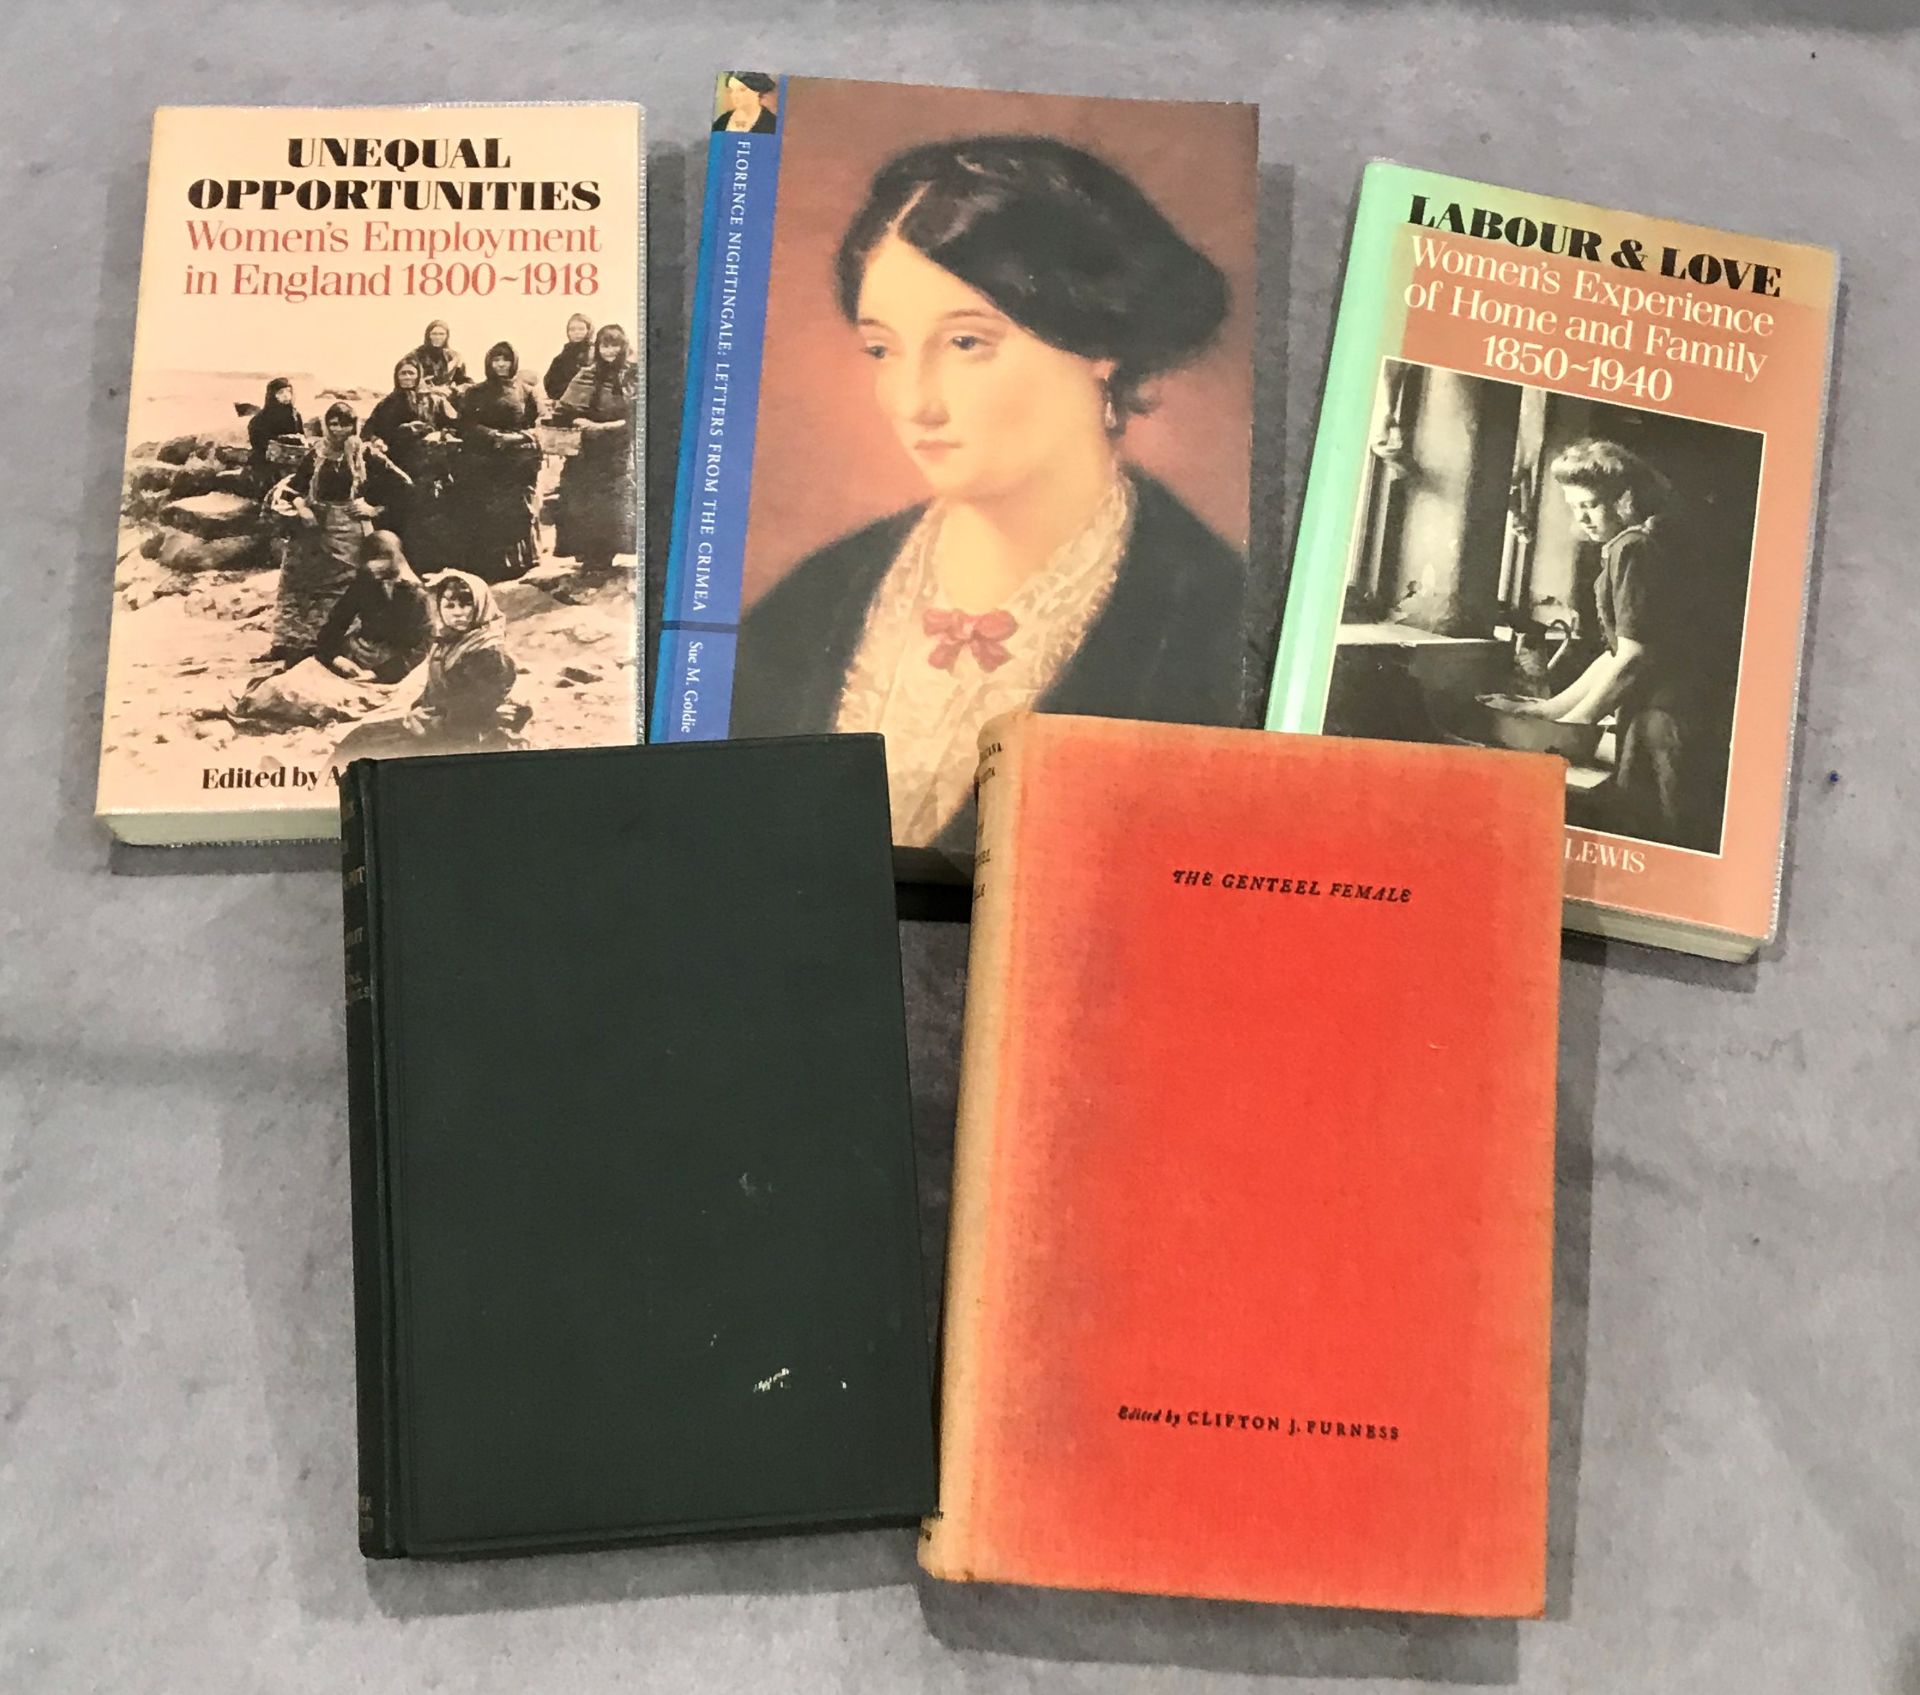 Contents to box twenty six books - history and other related. - Image 2 of 2